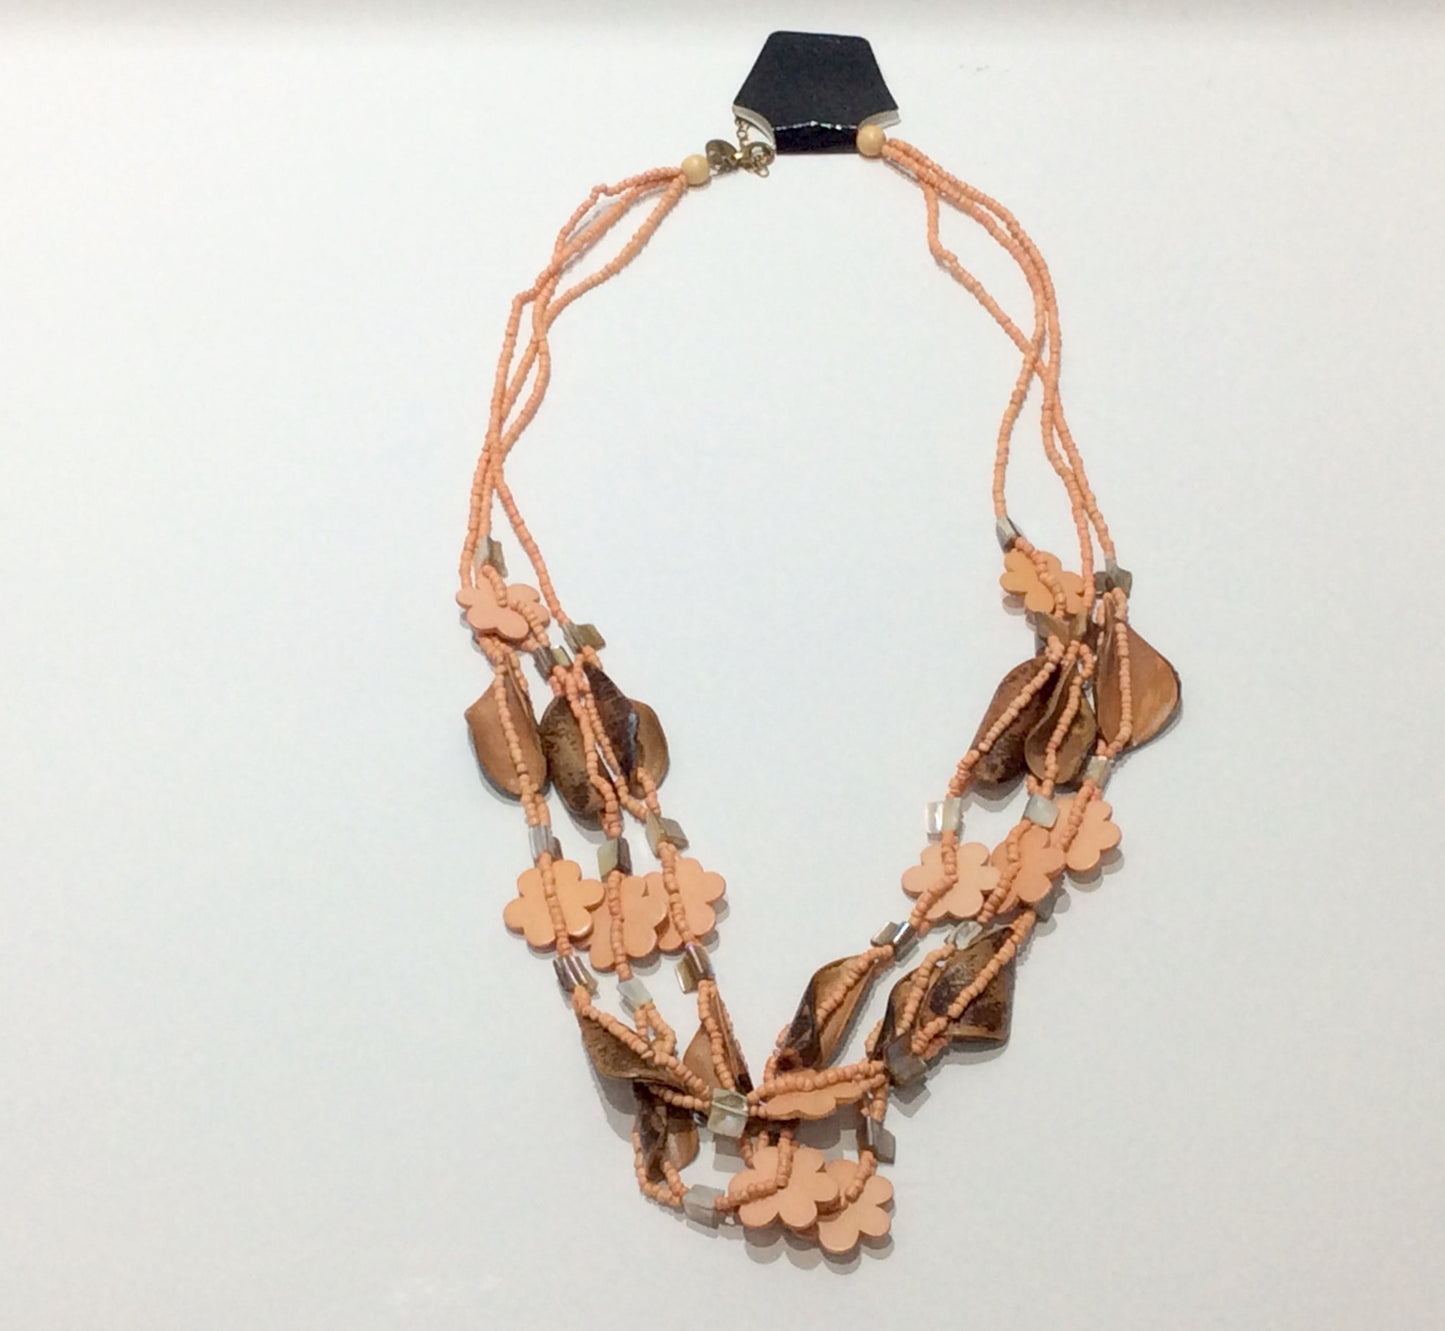 Necklace-Three strand beaded necklace with wooden flower shaped, shell and leather beads